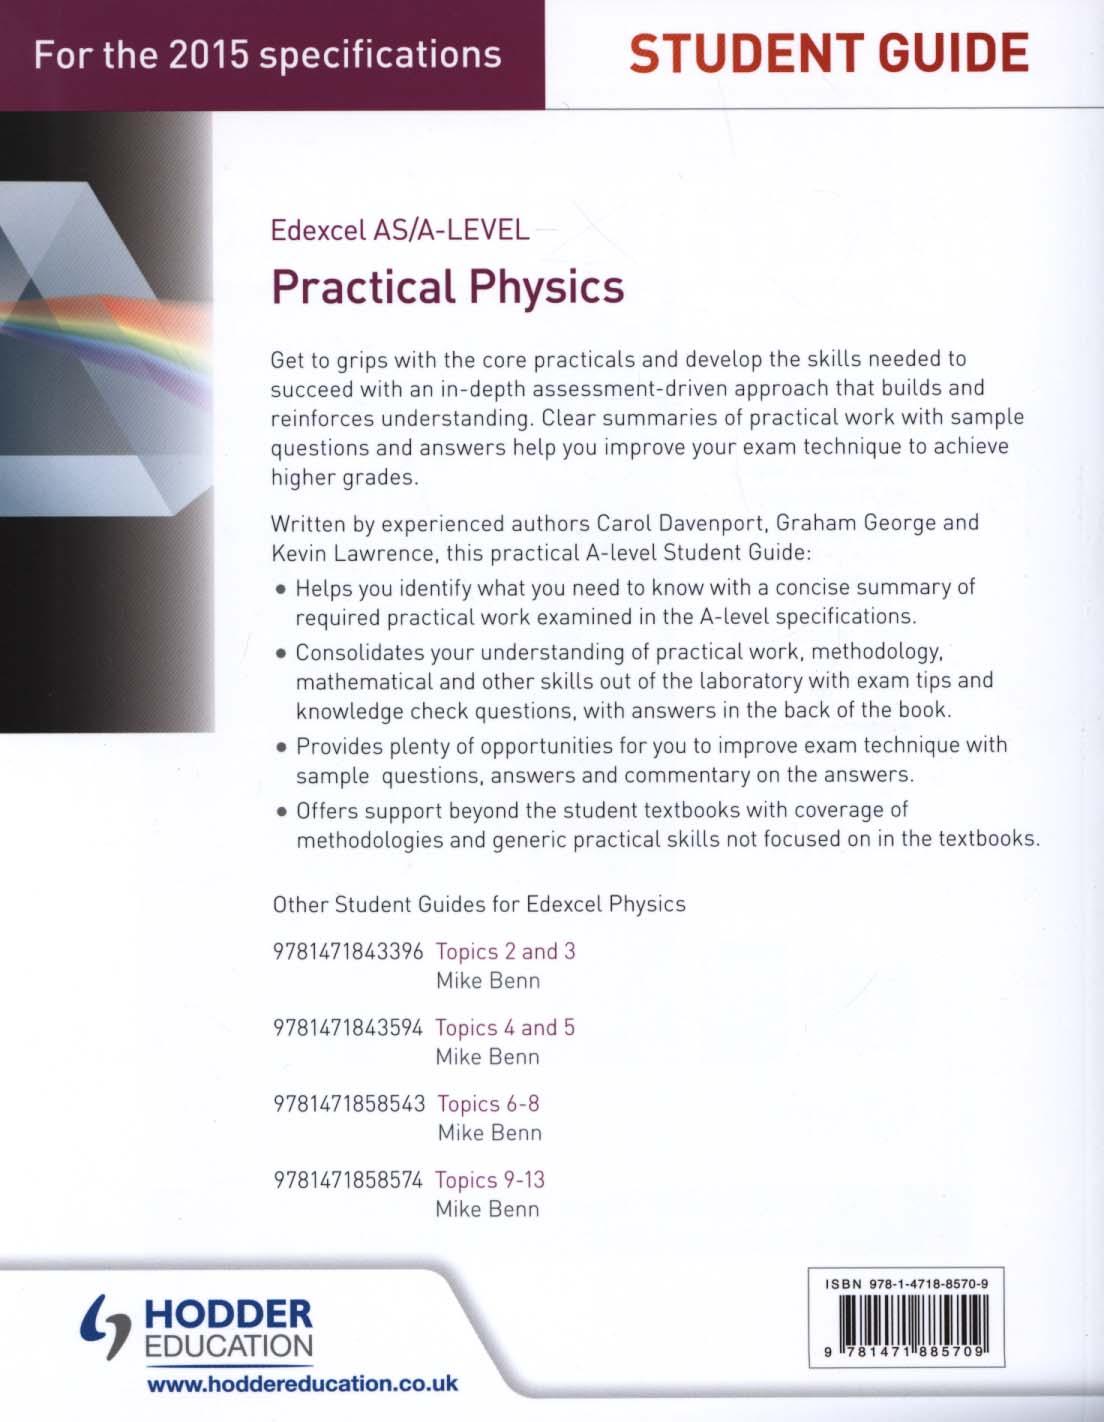 Edexcel A-Level Physics Student Guide: Practical Physics